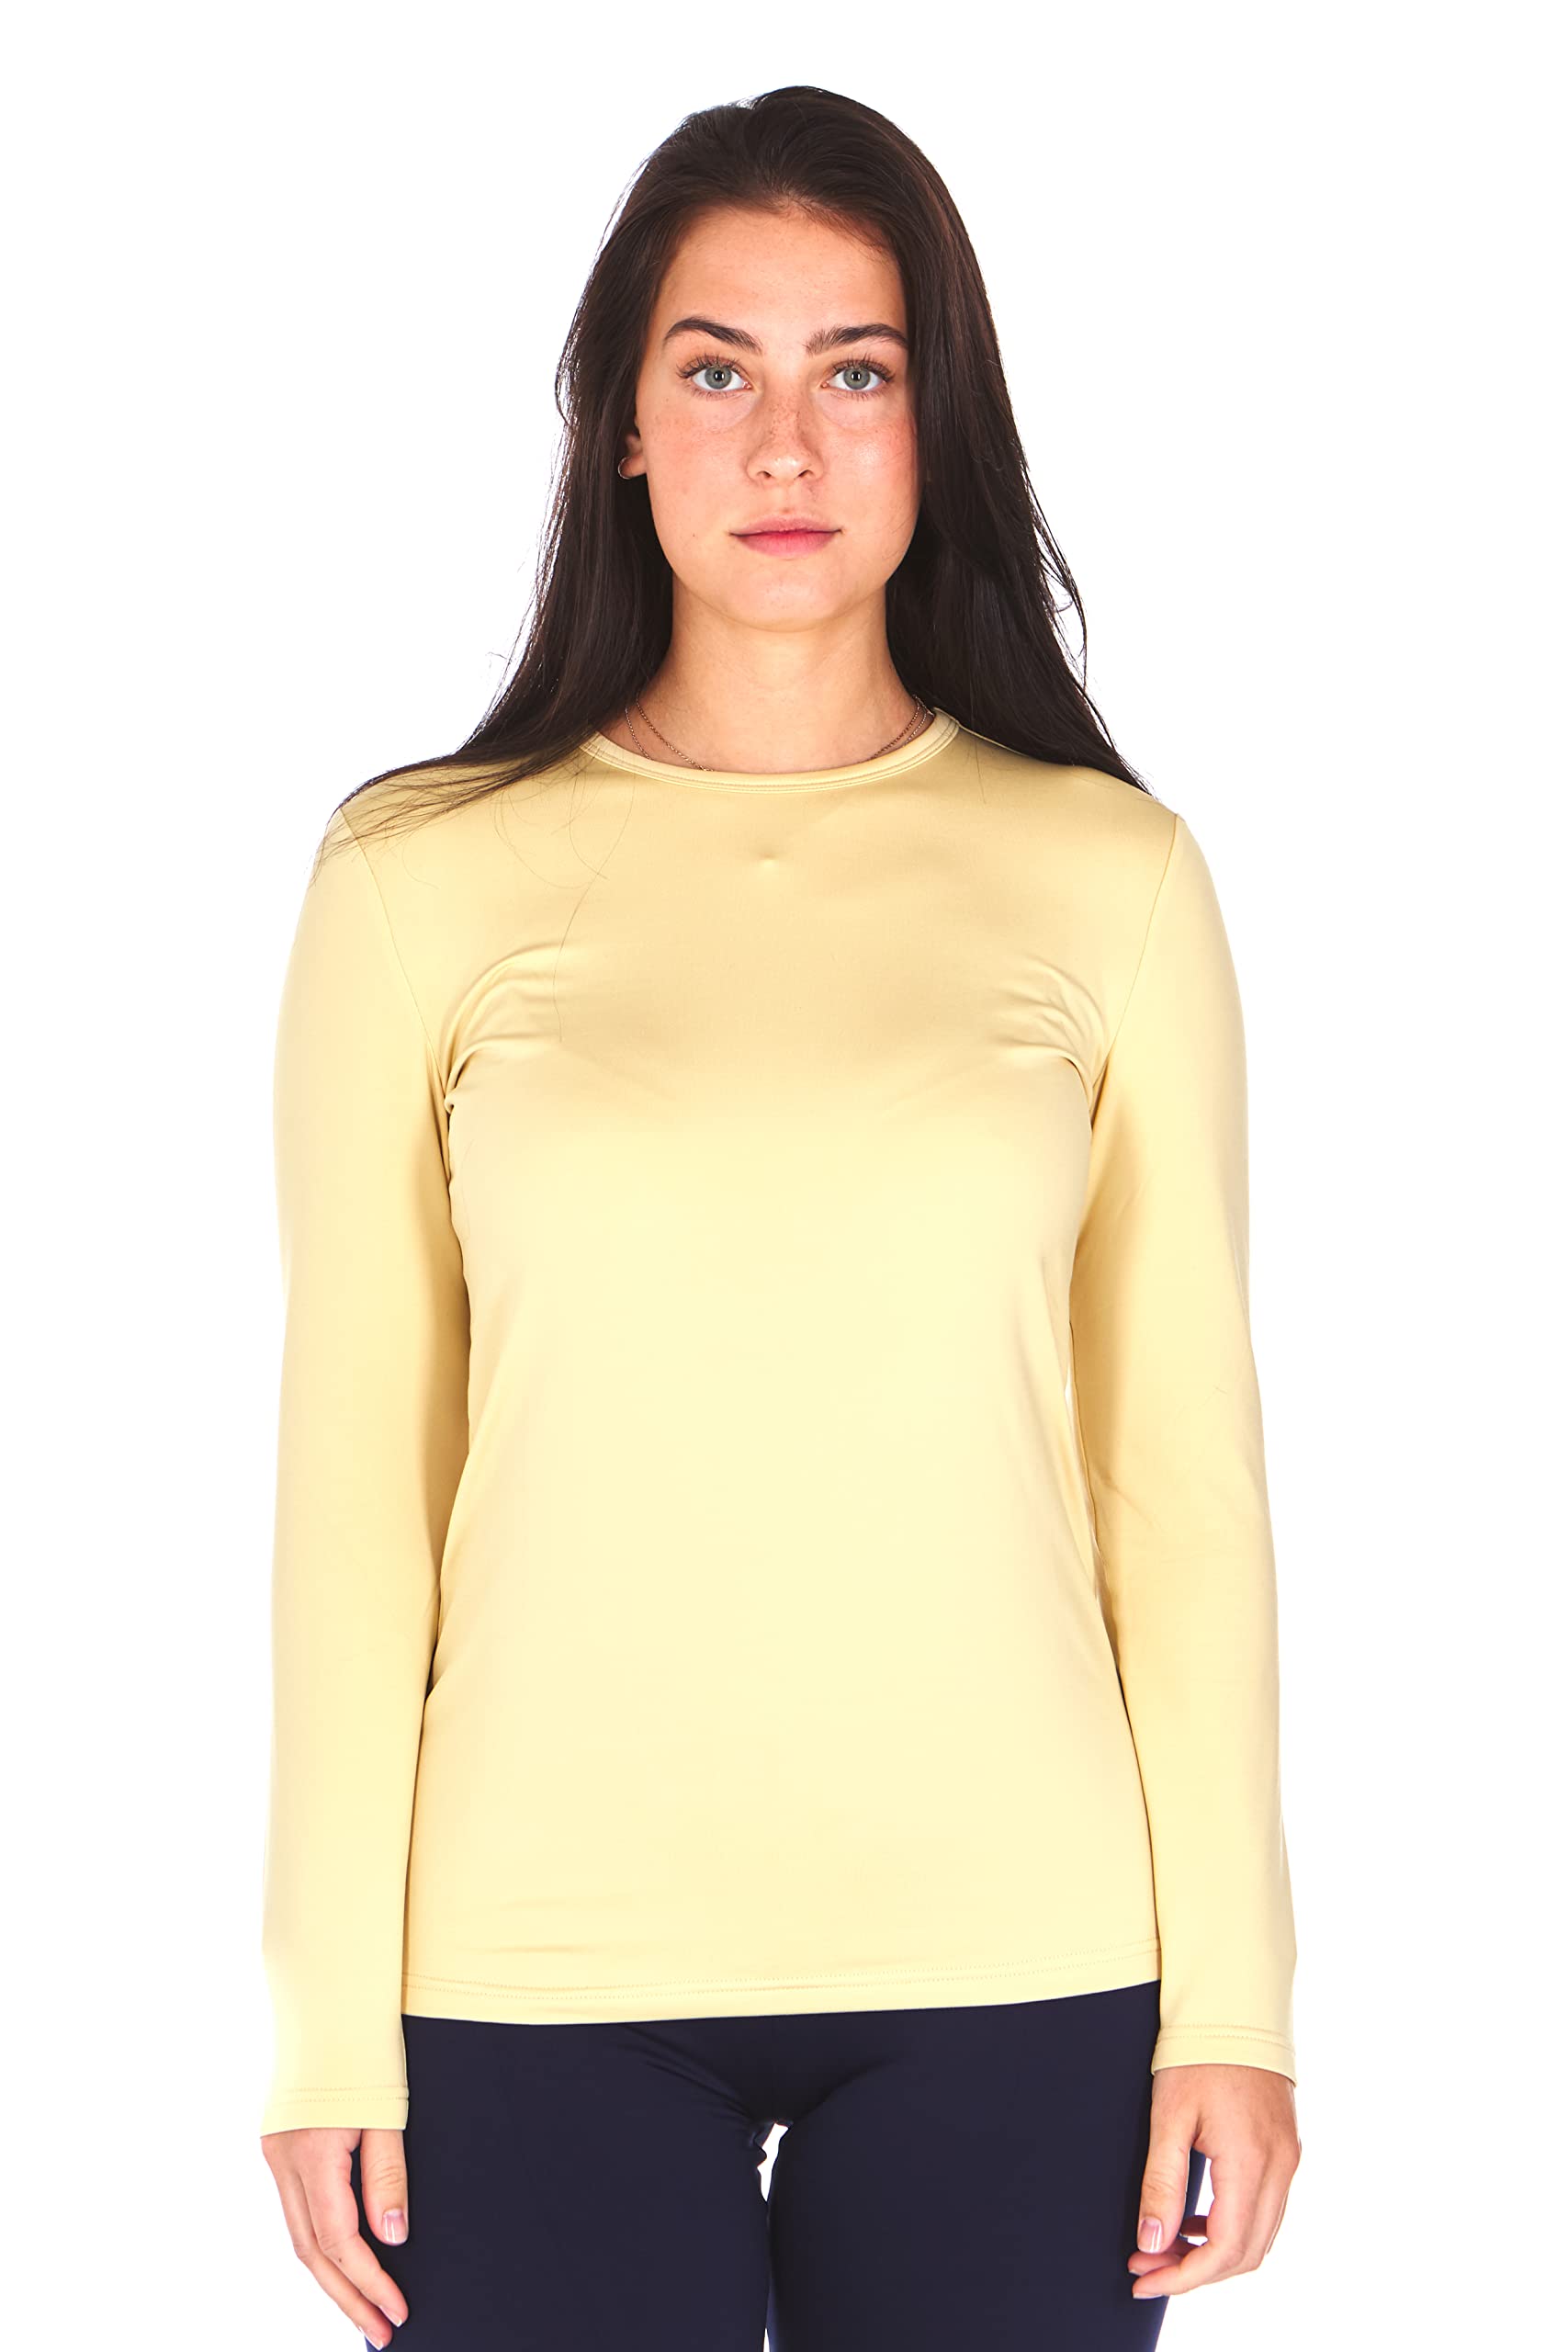 Thermajane Thermal Shirts for Women Long Sleeve Winter Tops Thermal  Undershirt for Women Nude Small